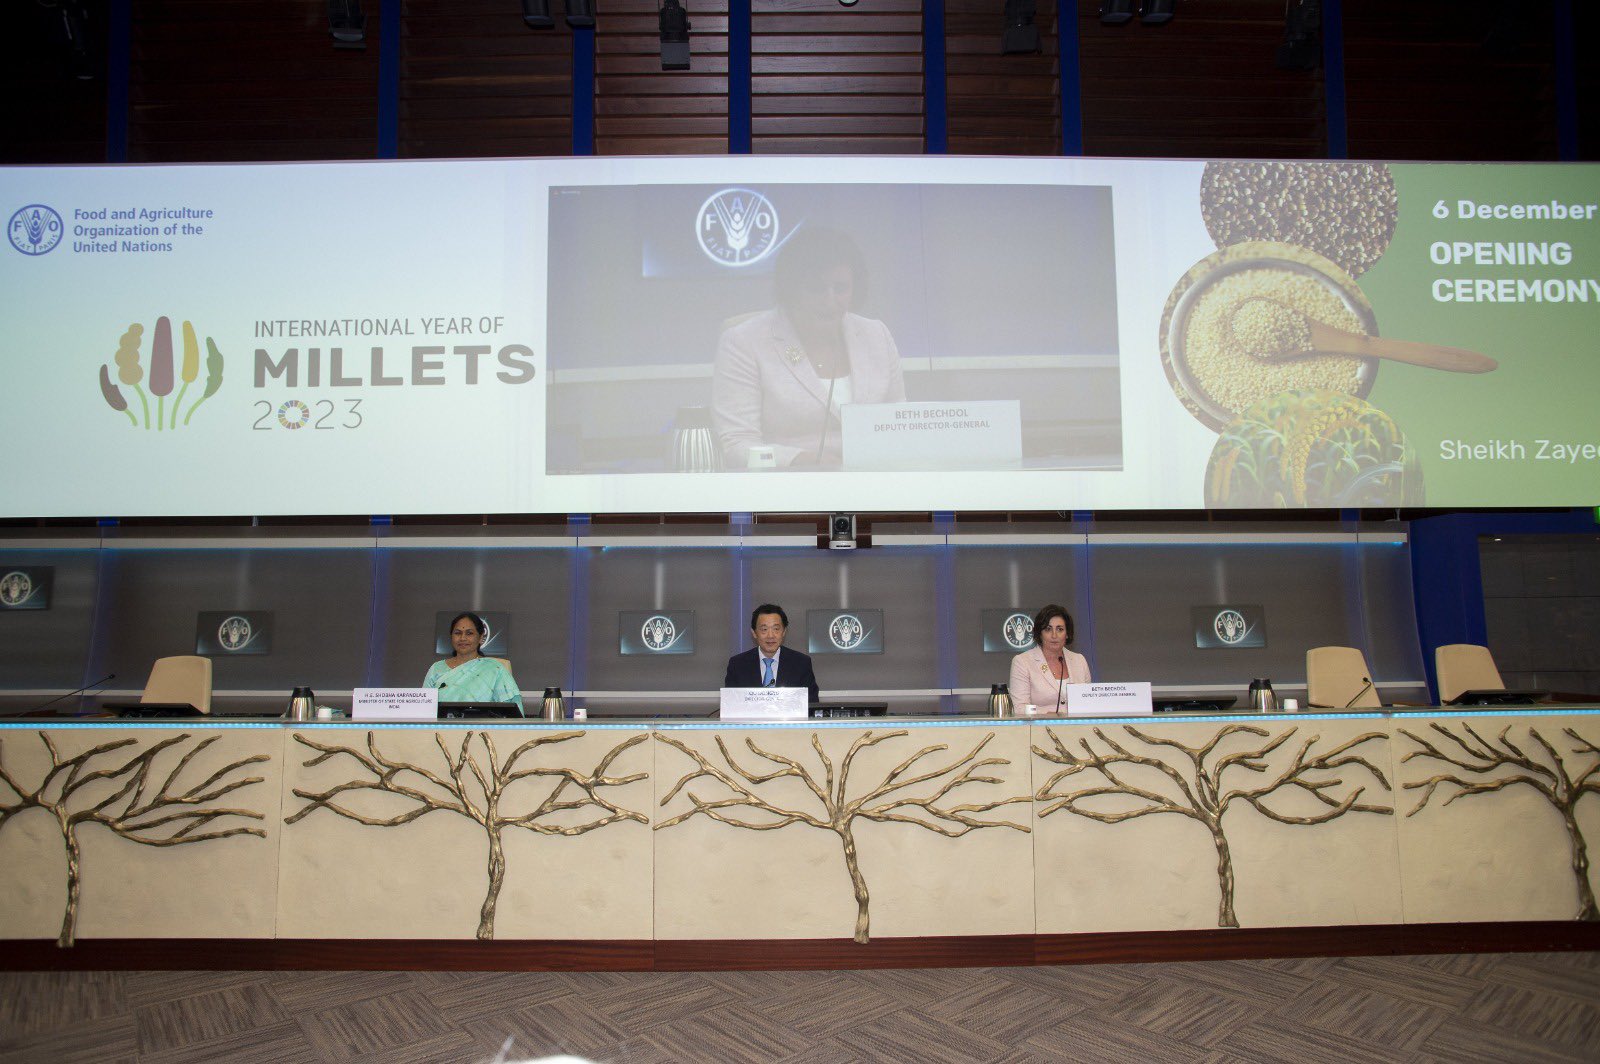 Inauguration of International Year of Millets-2023 at FAO